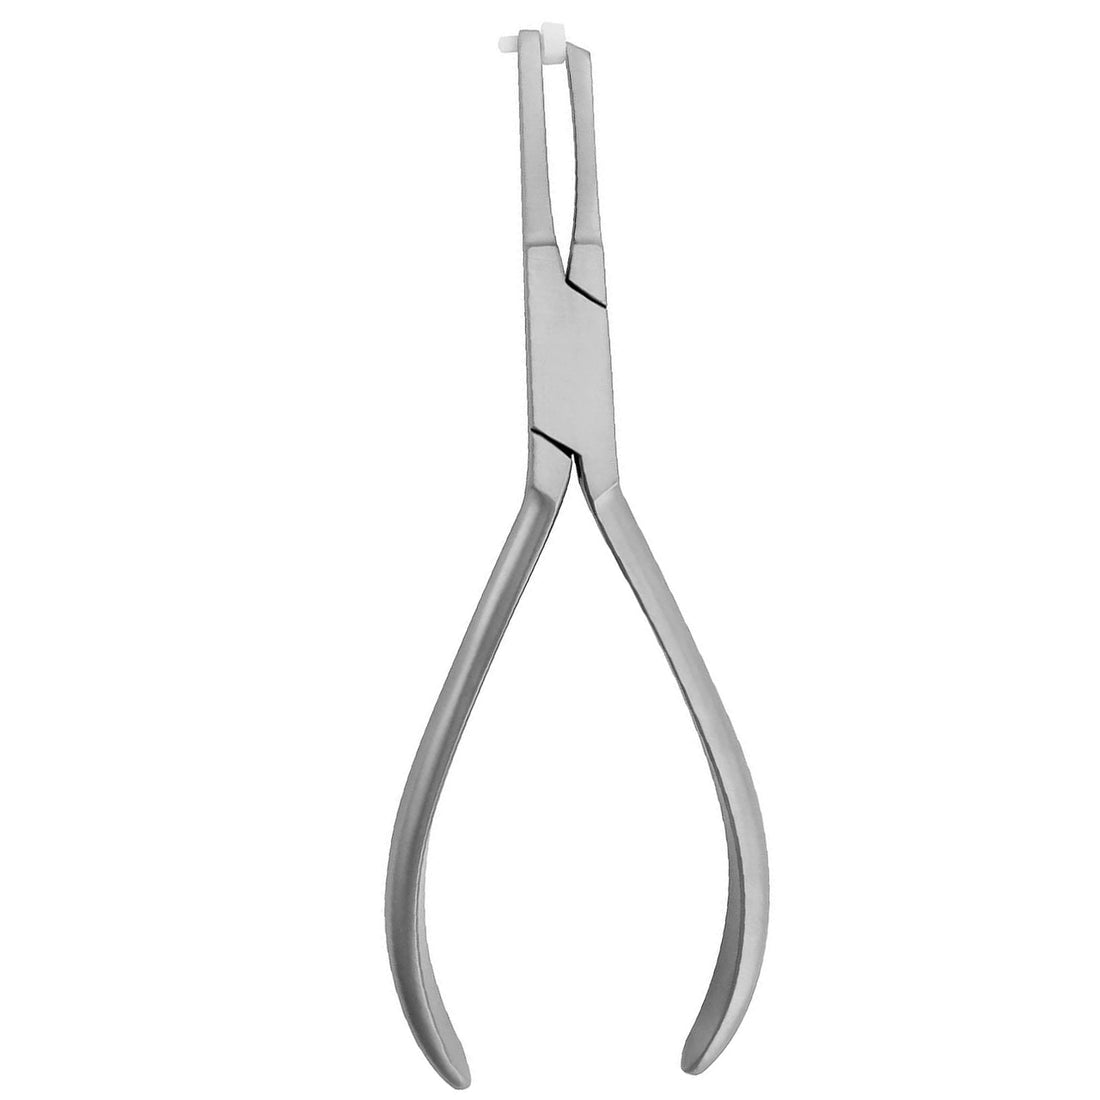 Posterior Band Removing Pliers, Long